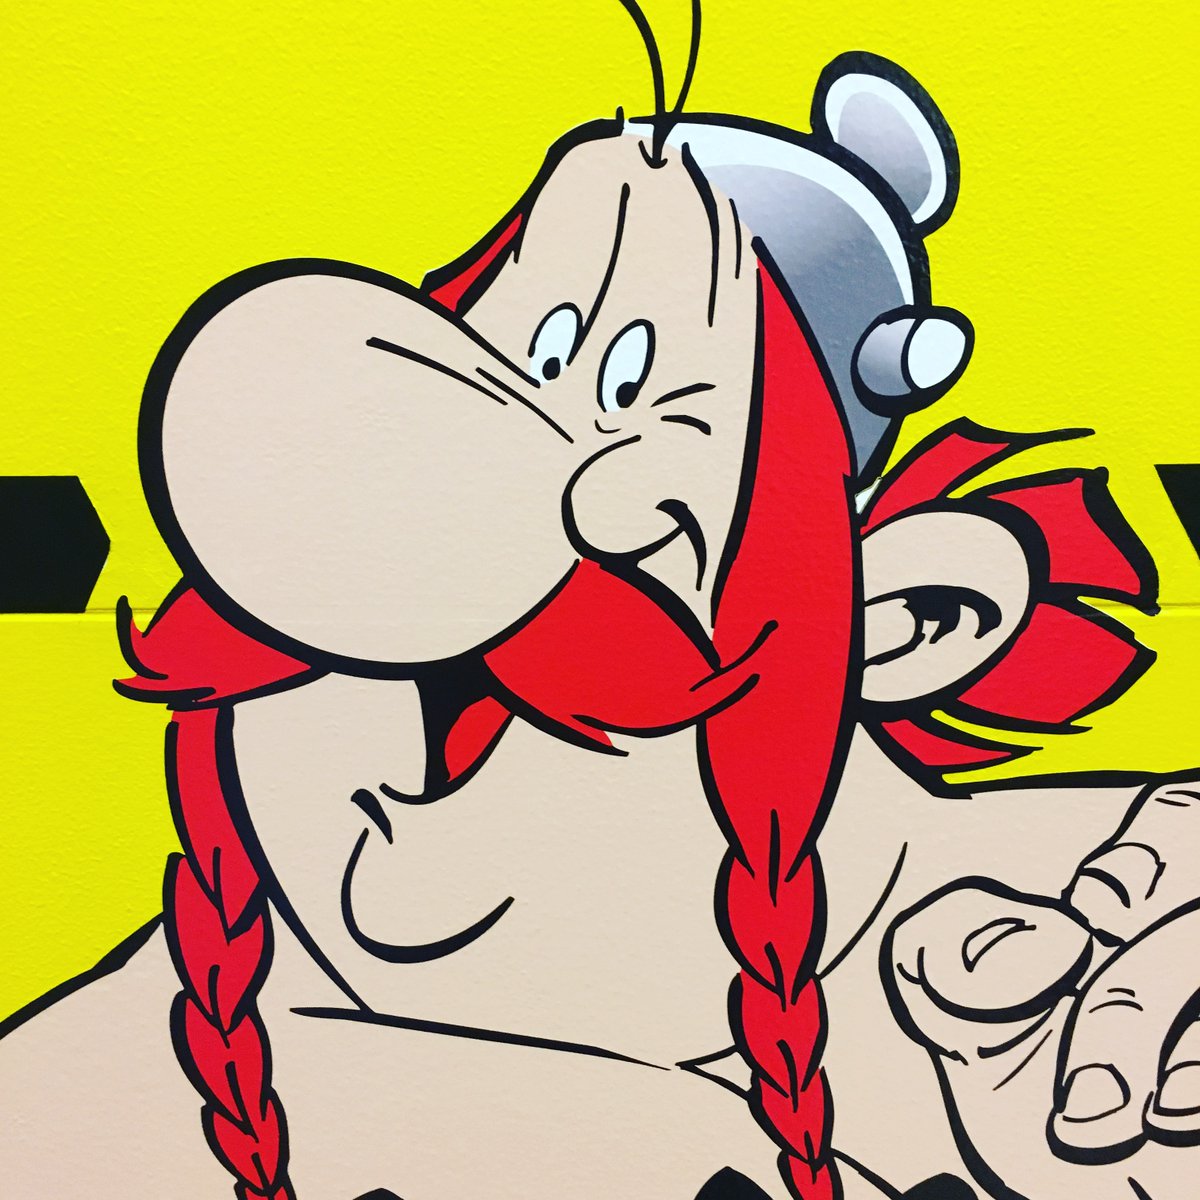 Another brilliant  #LondonMuseum in  #Camden is the  @JewishMuseumLDN they run the most remarkable exhibitions including 'Jews, Money and Myth' and the 'Asterix in Britain' exhibition, always surprising and thought provoking  #MuseumsUnlocked